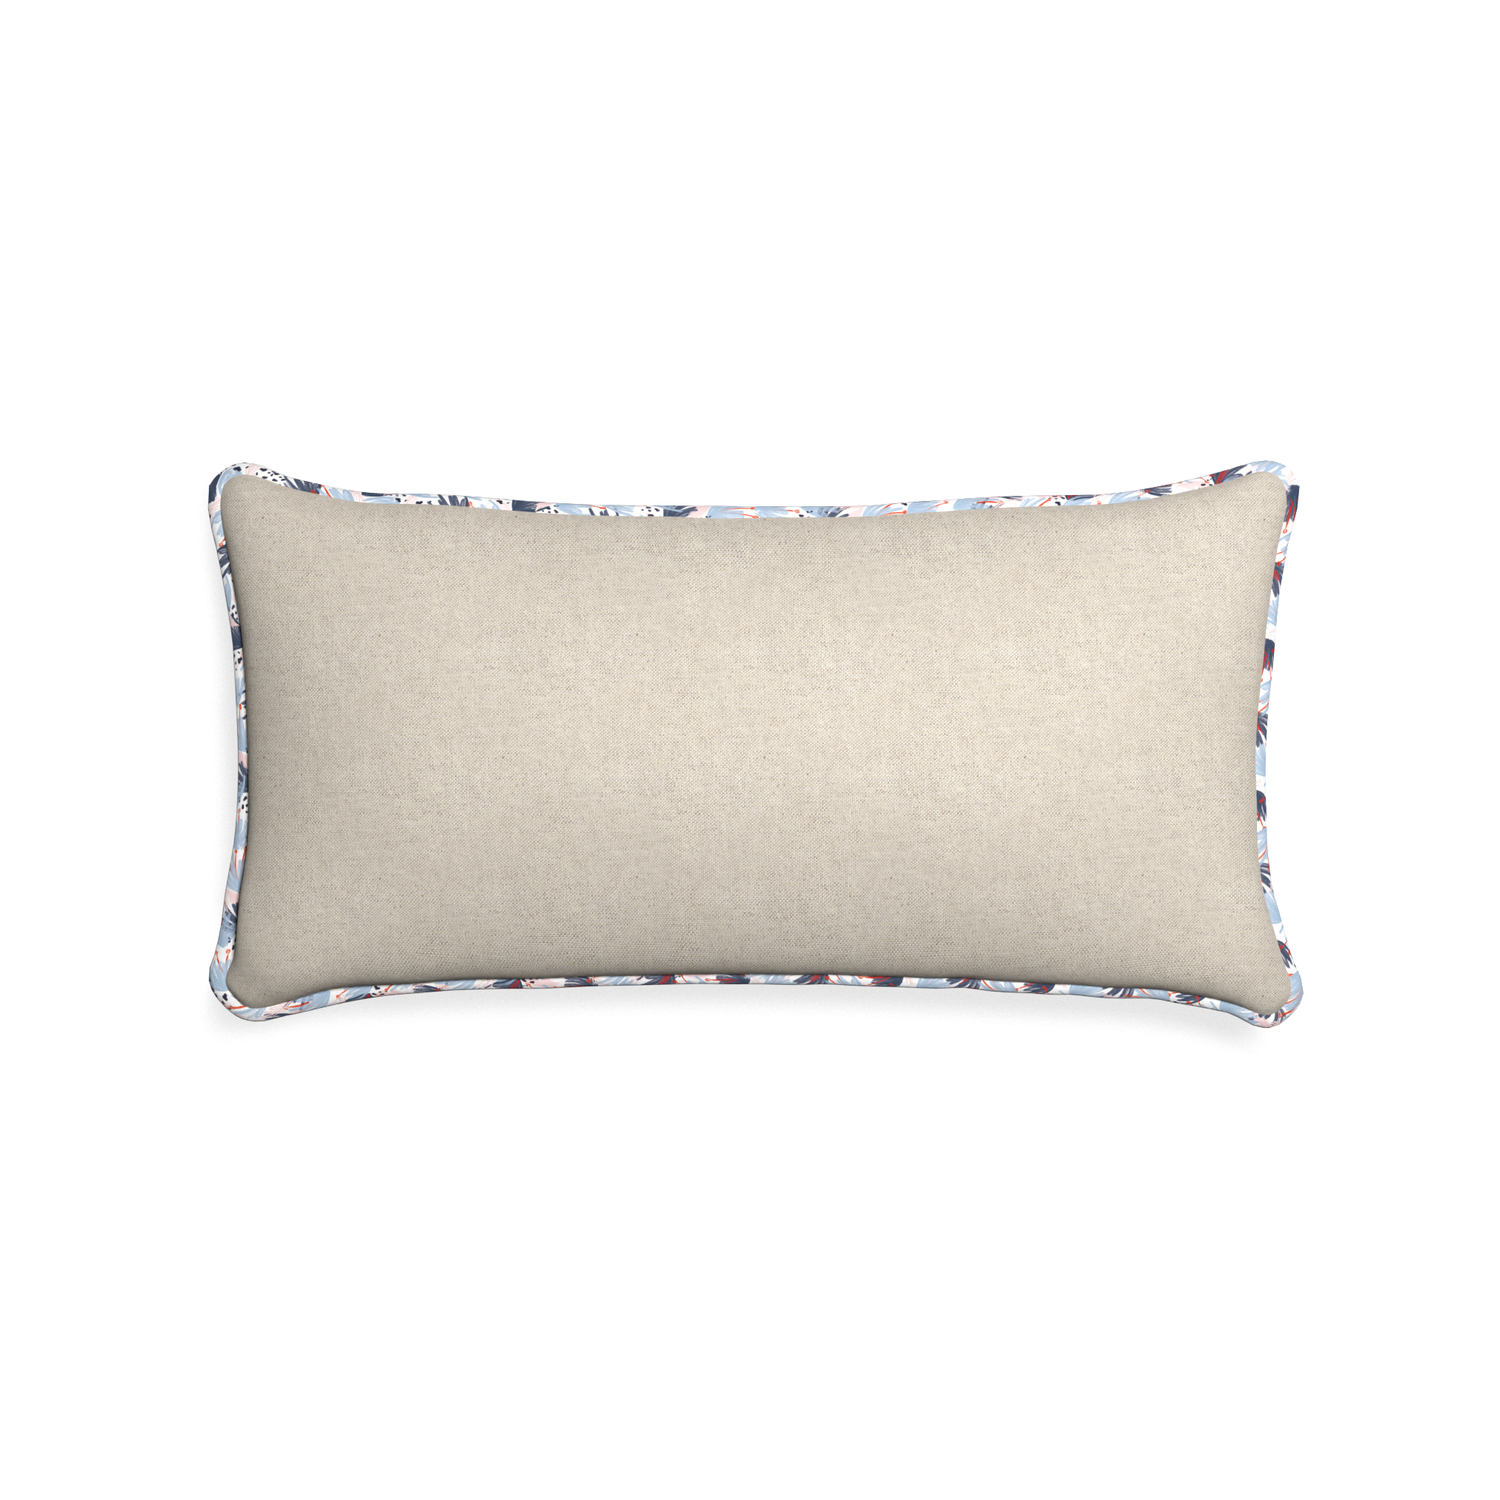 Midi-lumbar oat custom light brownpillow with e piping on white background